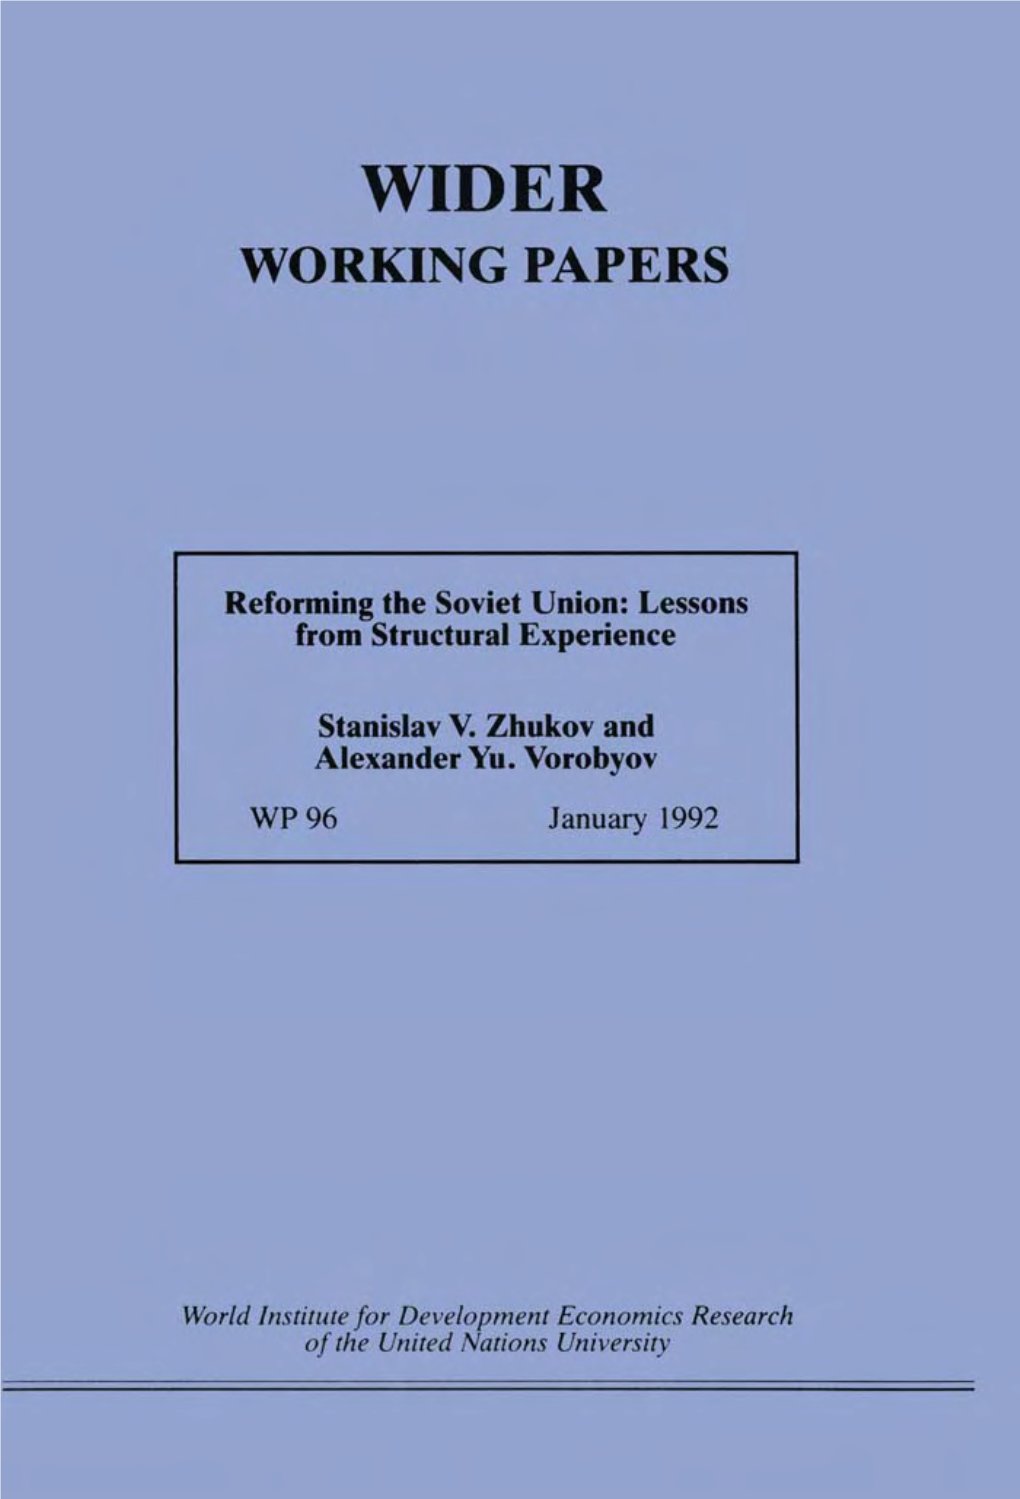 Reforming the Soviet Union: Lessons from Structural Experience